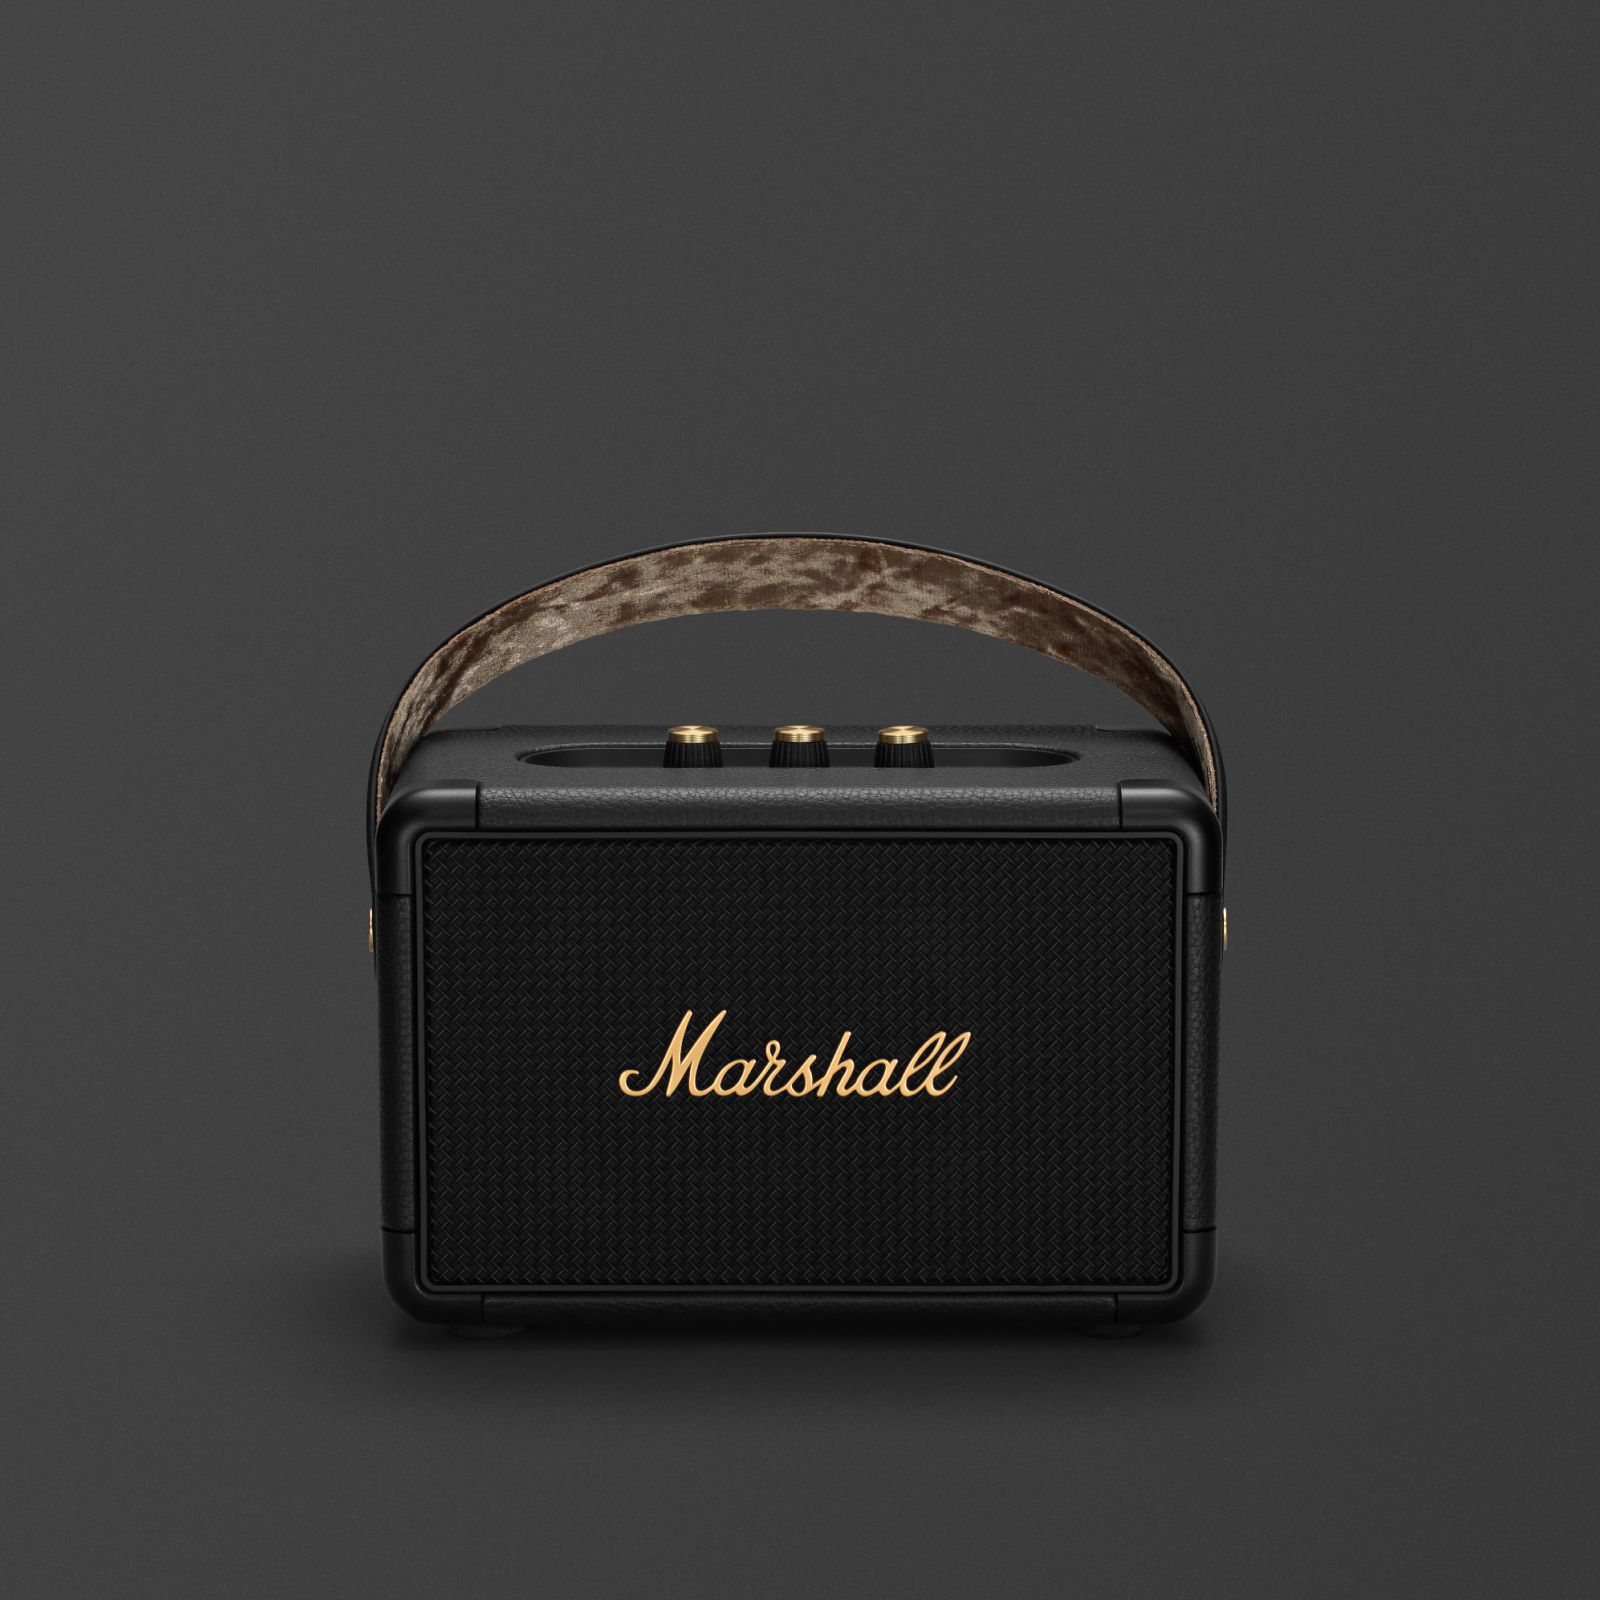 Marshall Woburn II Black and Brass Speaker face front